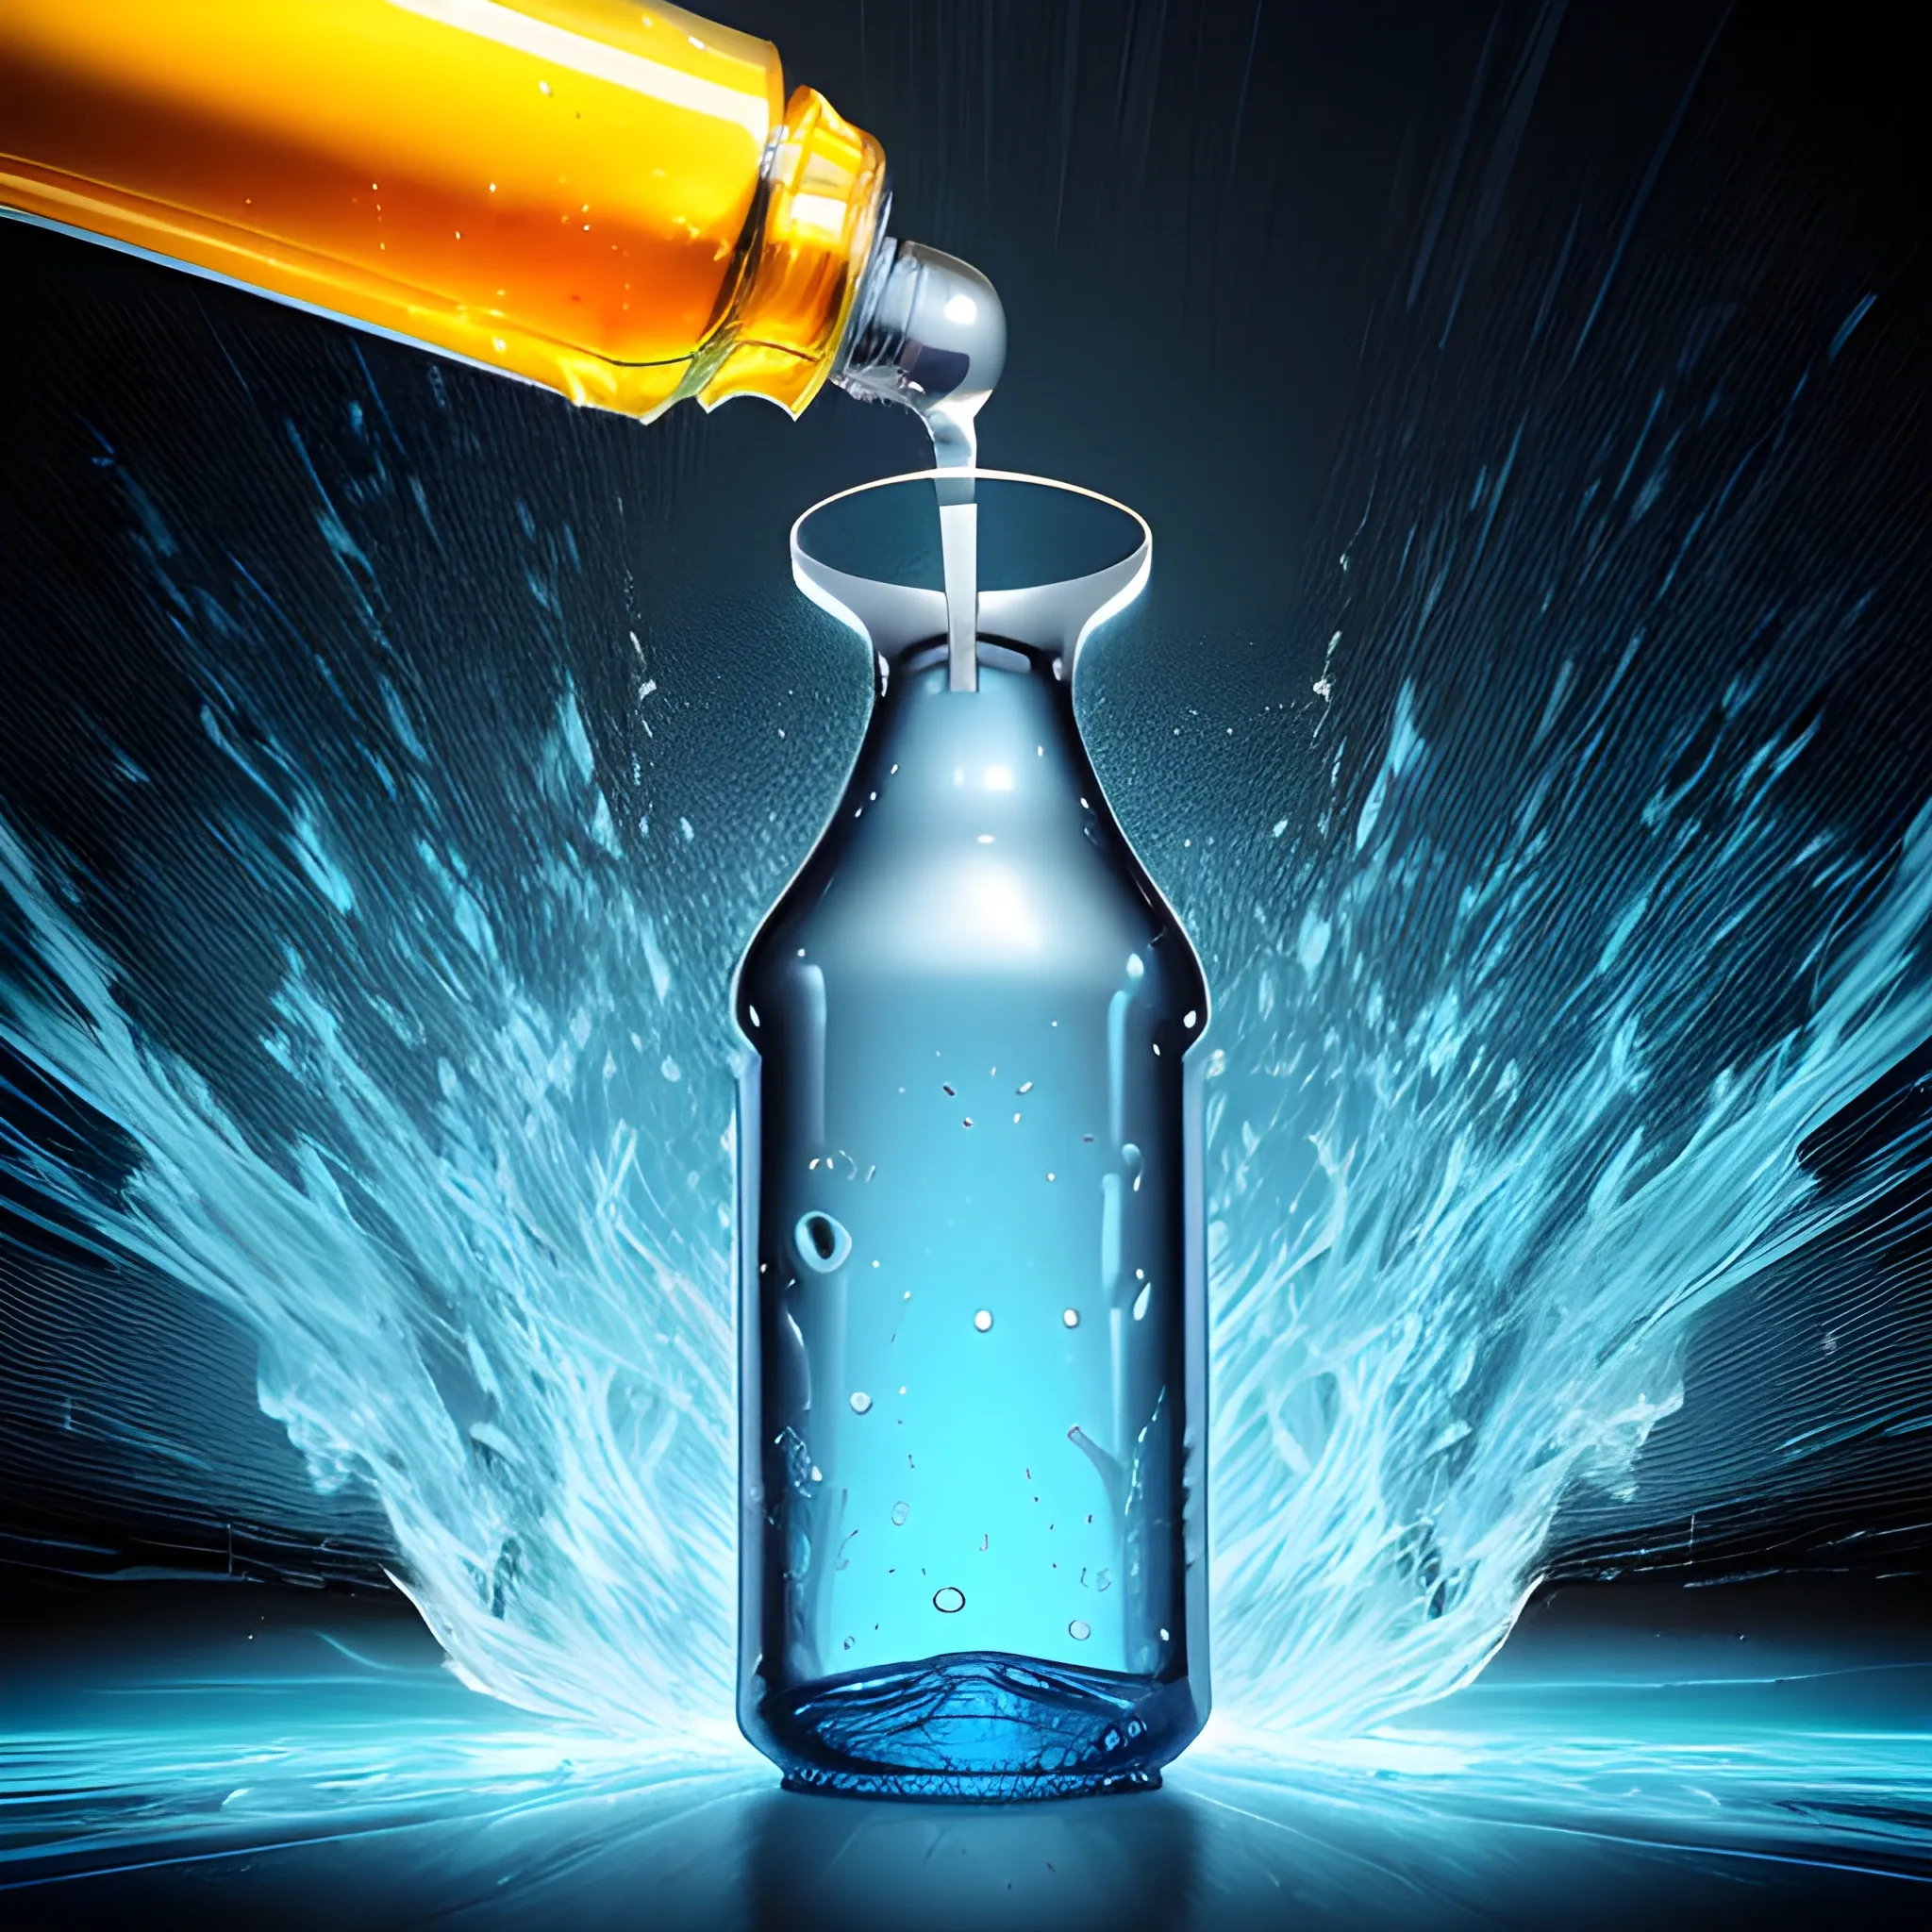  Imagine a blue nitro bottle, its exterior adorned in a vibrant shade of deep blue. The color is intense, almost electric, giving off a sense of energy and potential. The surface of the bottle appears sleek and metallic, reflecting the ambient light in a captivating way.

Now, as you observe the bottle, there's a visual illusion that suggests a state of near-explosion. The blue hue seems to intensify near the top, as if the pressure inside is building up to a critical point. There might be subtle distortions in the reflection, creating a dynamic and distorted appearance, as if the container is straining against an invisible force.

The contours of the bottle might appear slightly exaggerated, with the shape subtly warping as though it's on the verge of bursting open. The cap or nozzle may seem to be under tension, as if struggling to contain the contained energy within. This illusion of impending explosion adds an element of drama to the visual, making the bottle appear as though it's frozen in a moment of intense anticipation, caught right before a burst of vibrant energy.